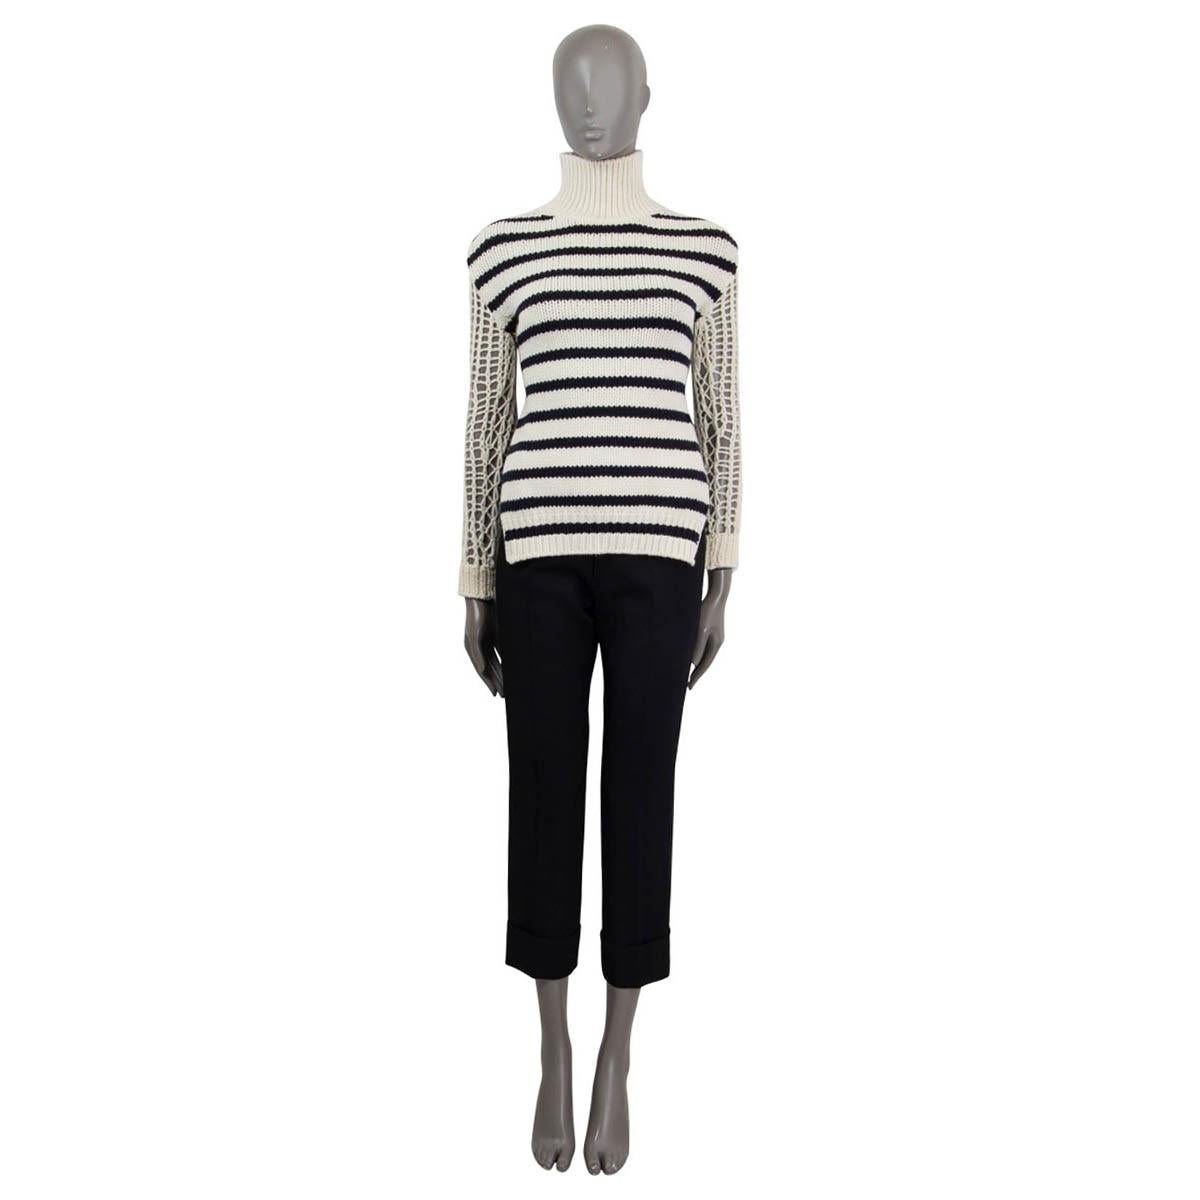 100% authentic Christian Dior Cruise 2022 open back striped turtleneck knit sweater in off-white and navy wool (70%) and polyamide (30%). Features long chunky knit sleeves and opens with a self-tie cord on the back. Unlined. Has been worn once and